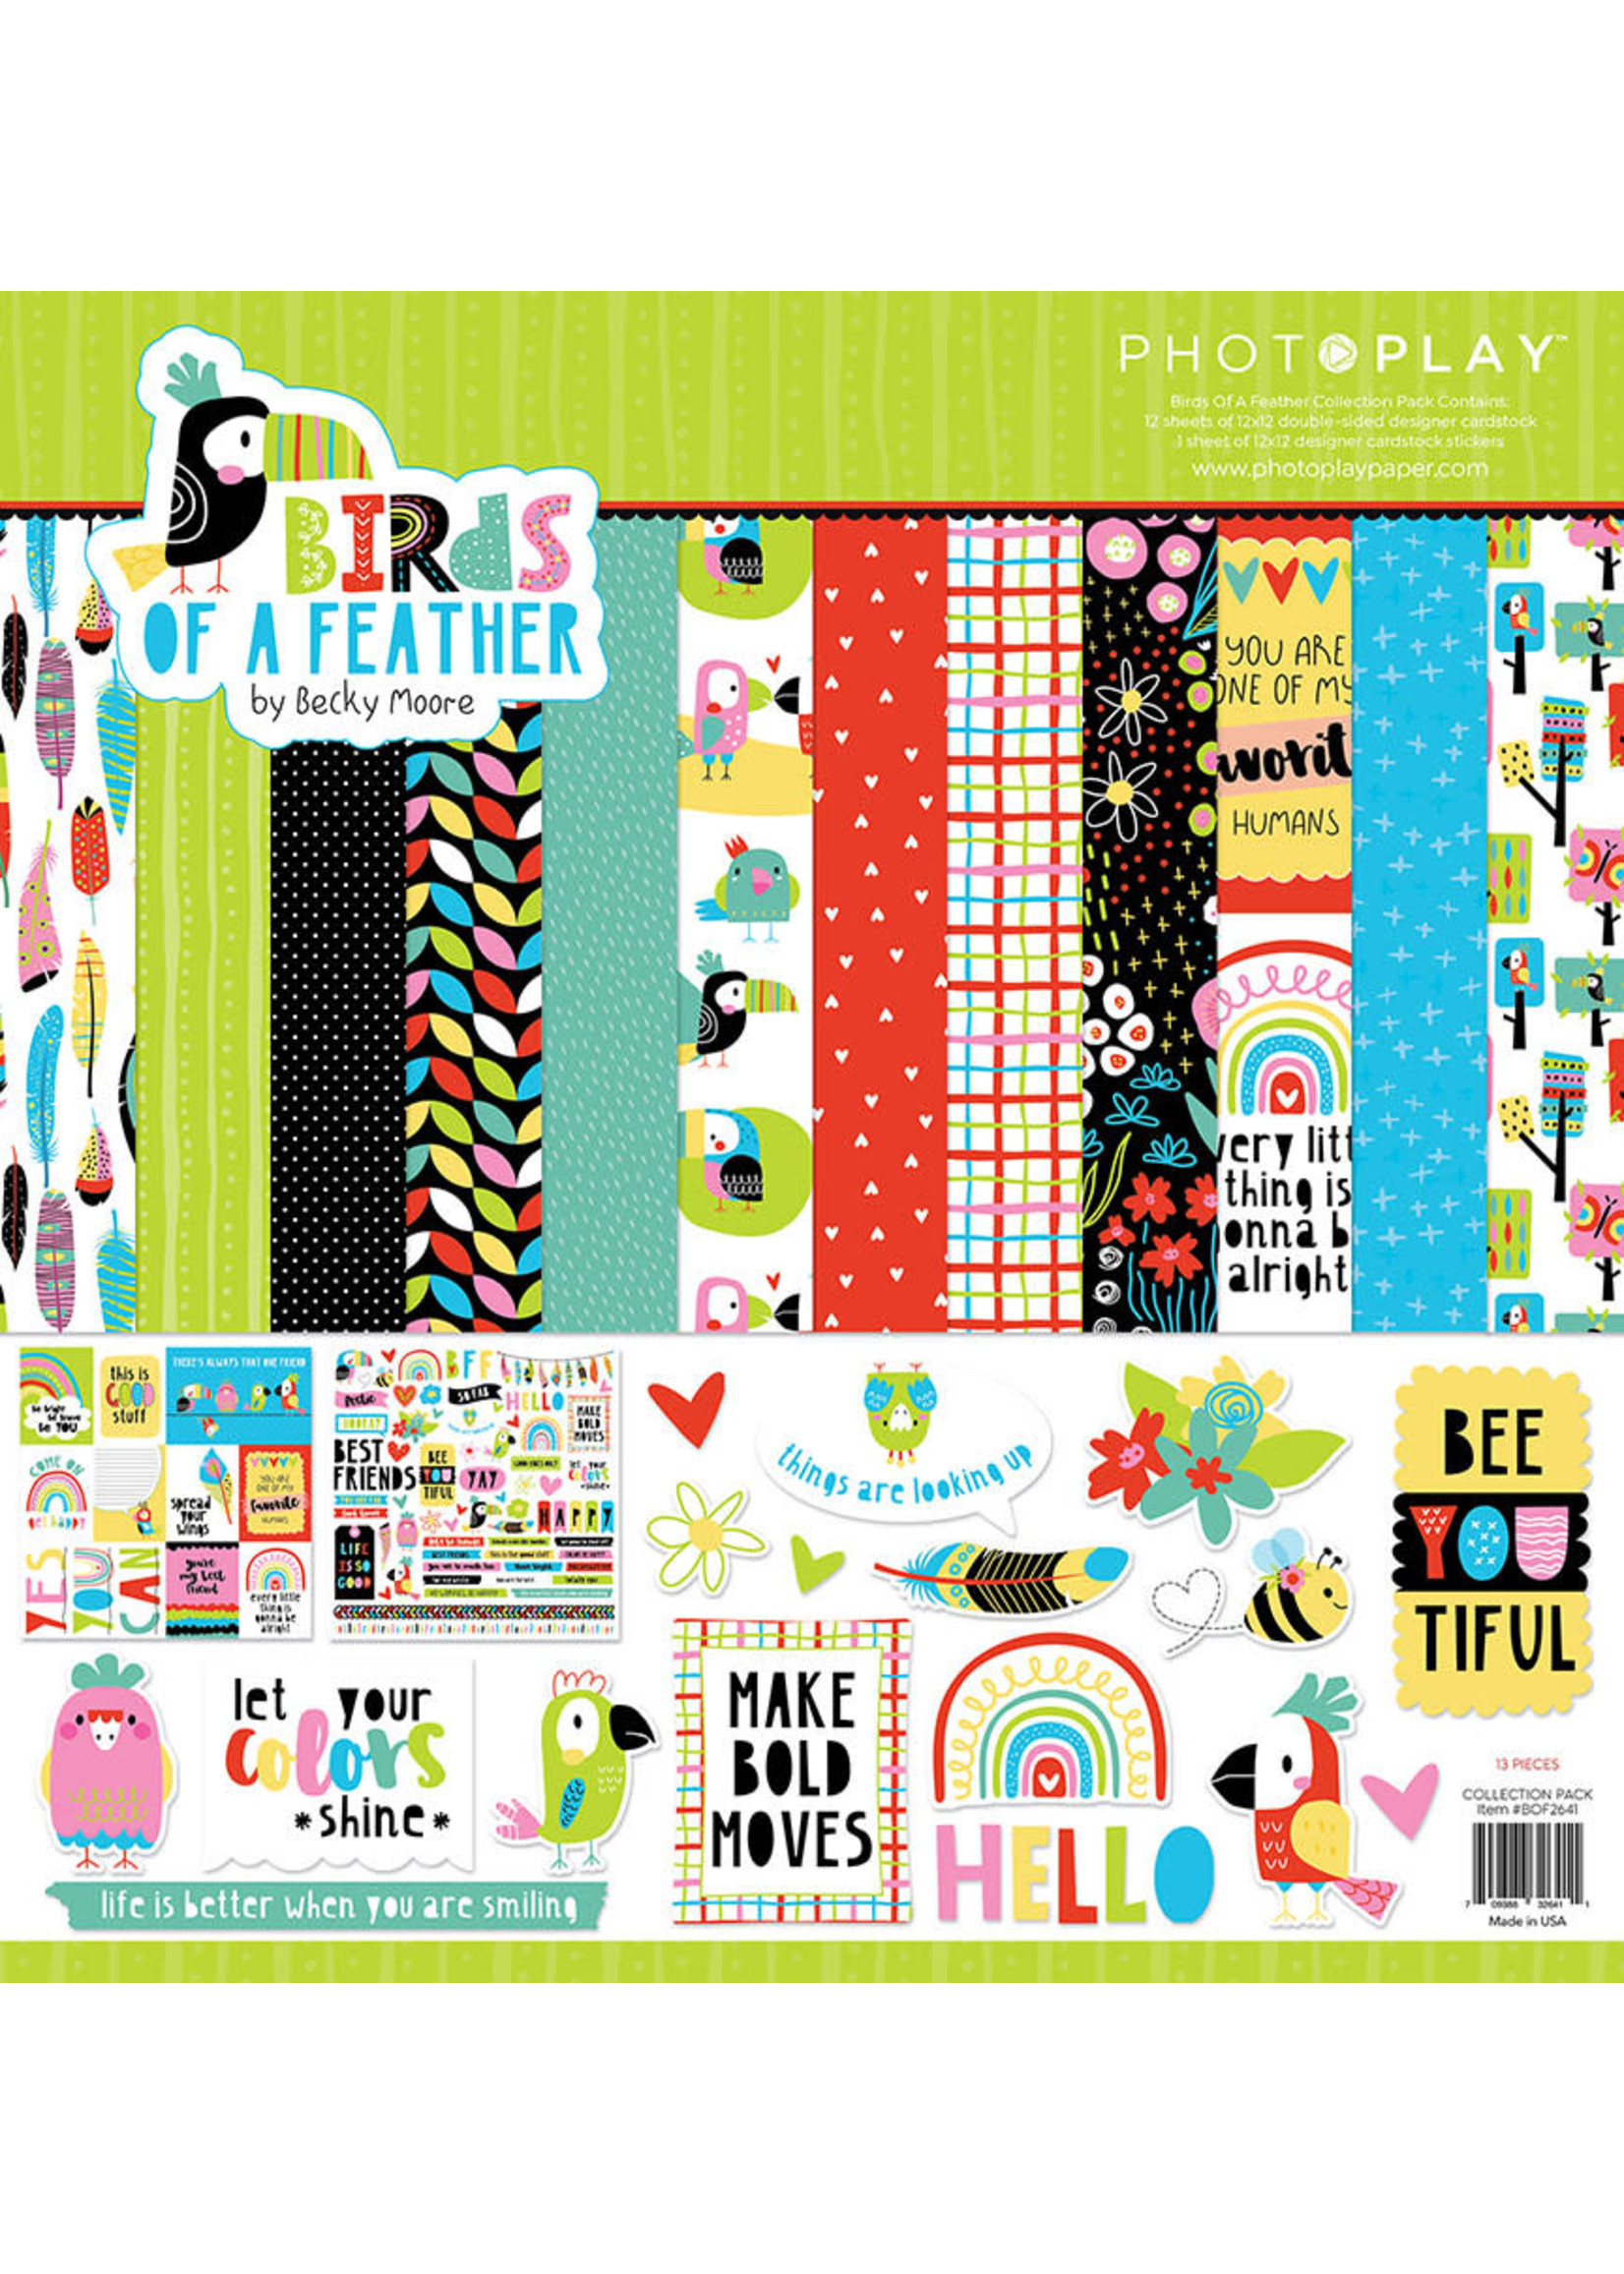 Photoplay Birds of a Feather: Collection Pack